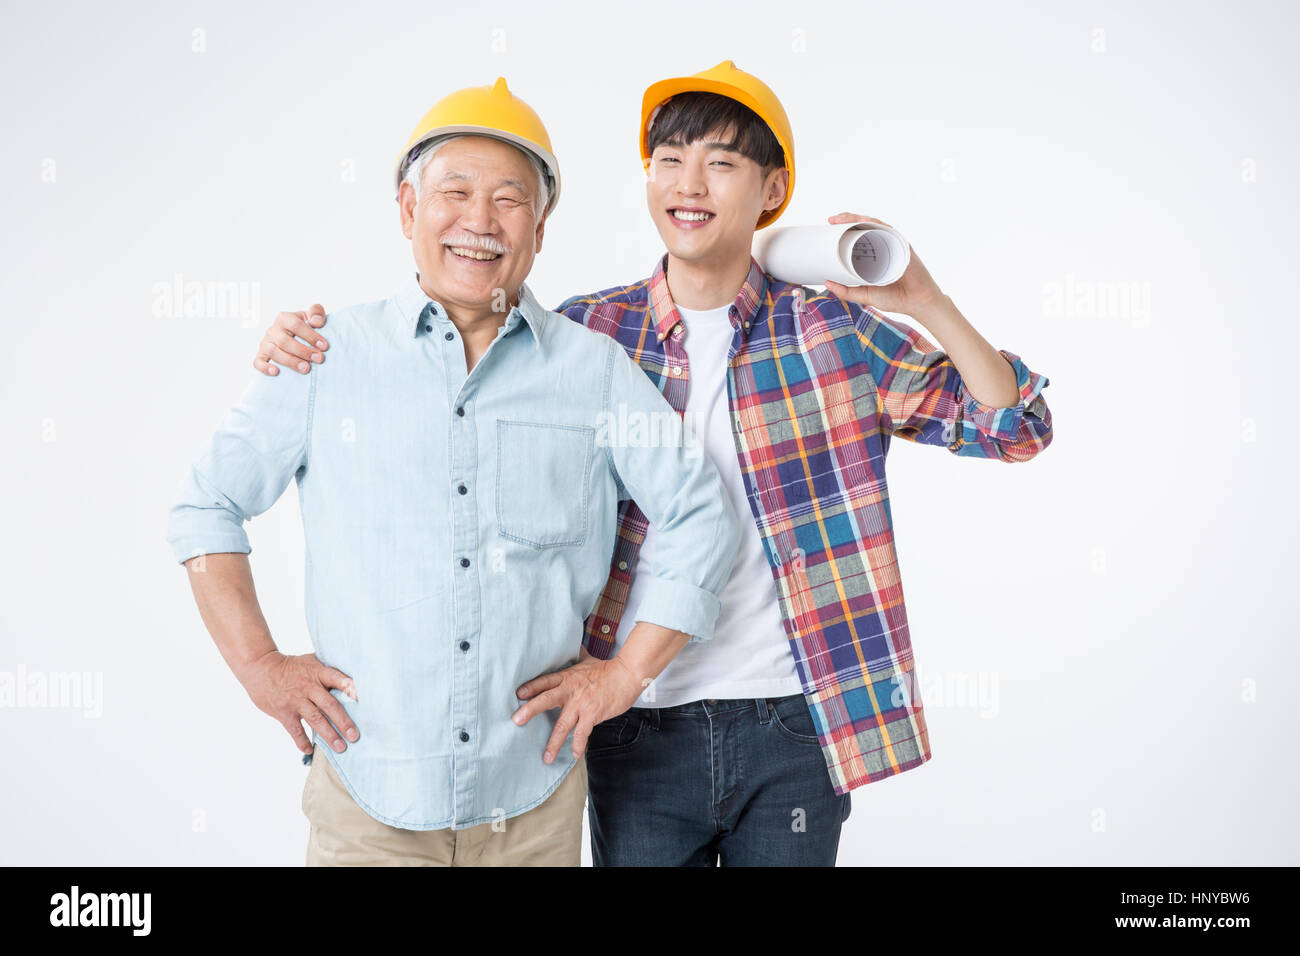 Smiling architects young and old Stock Photo